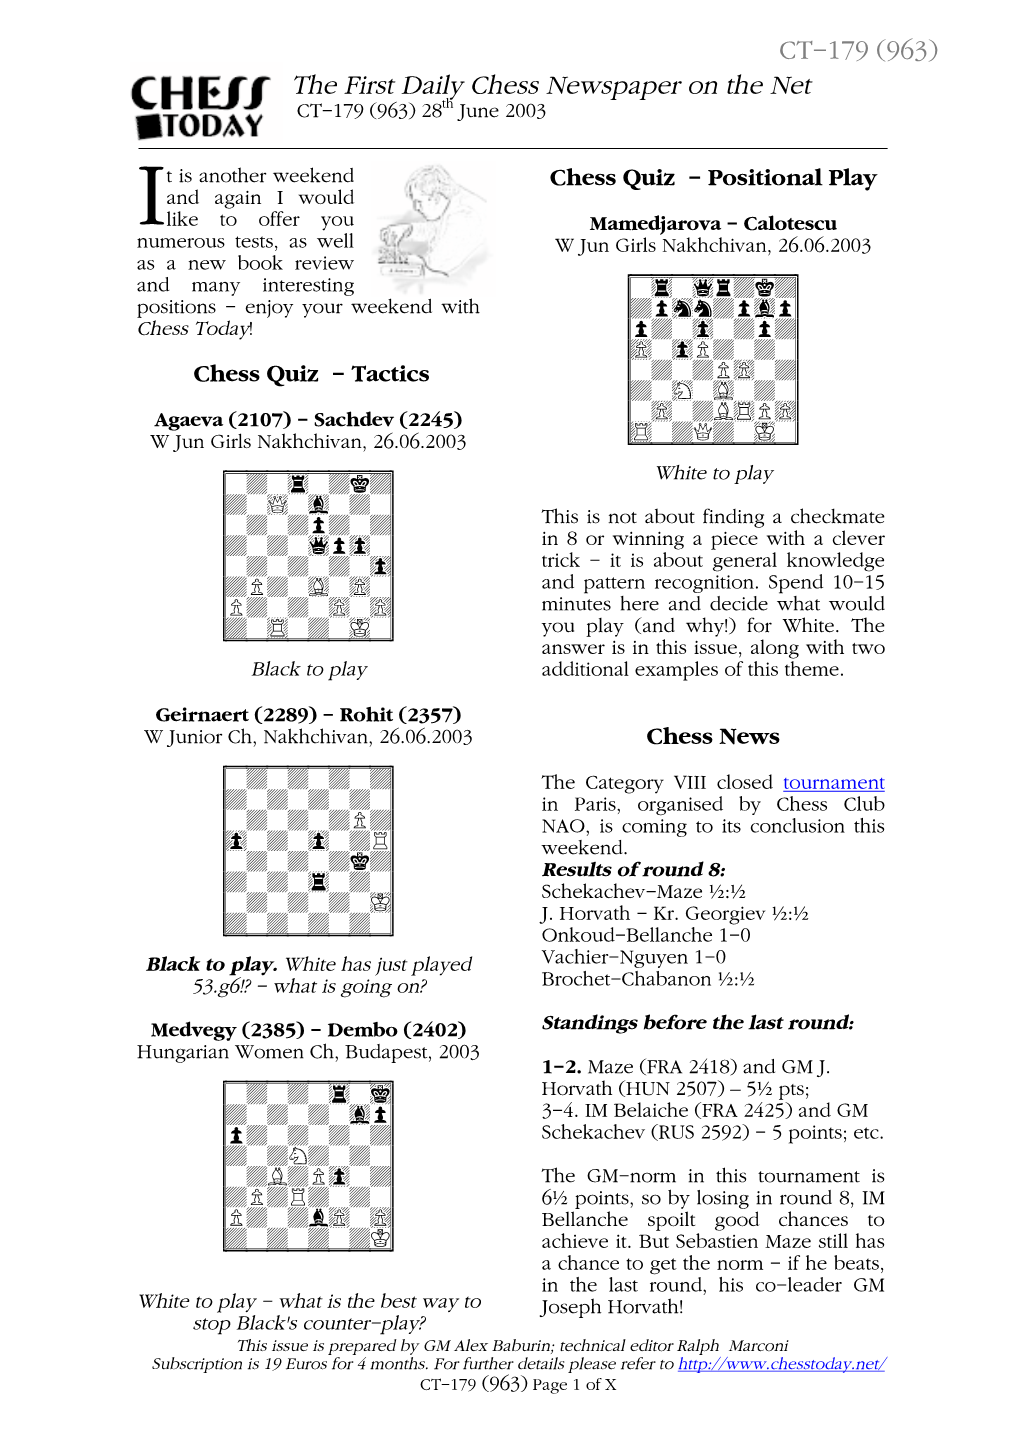 The First Daily Chess Newspaper on the Net CT-179 (963) 28Th June 2003